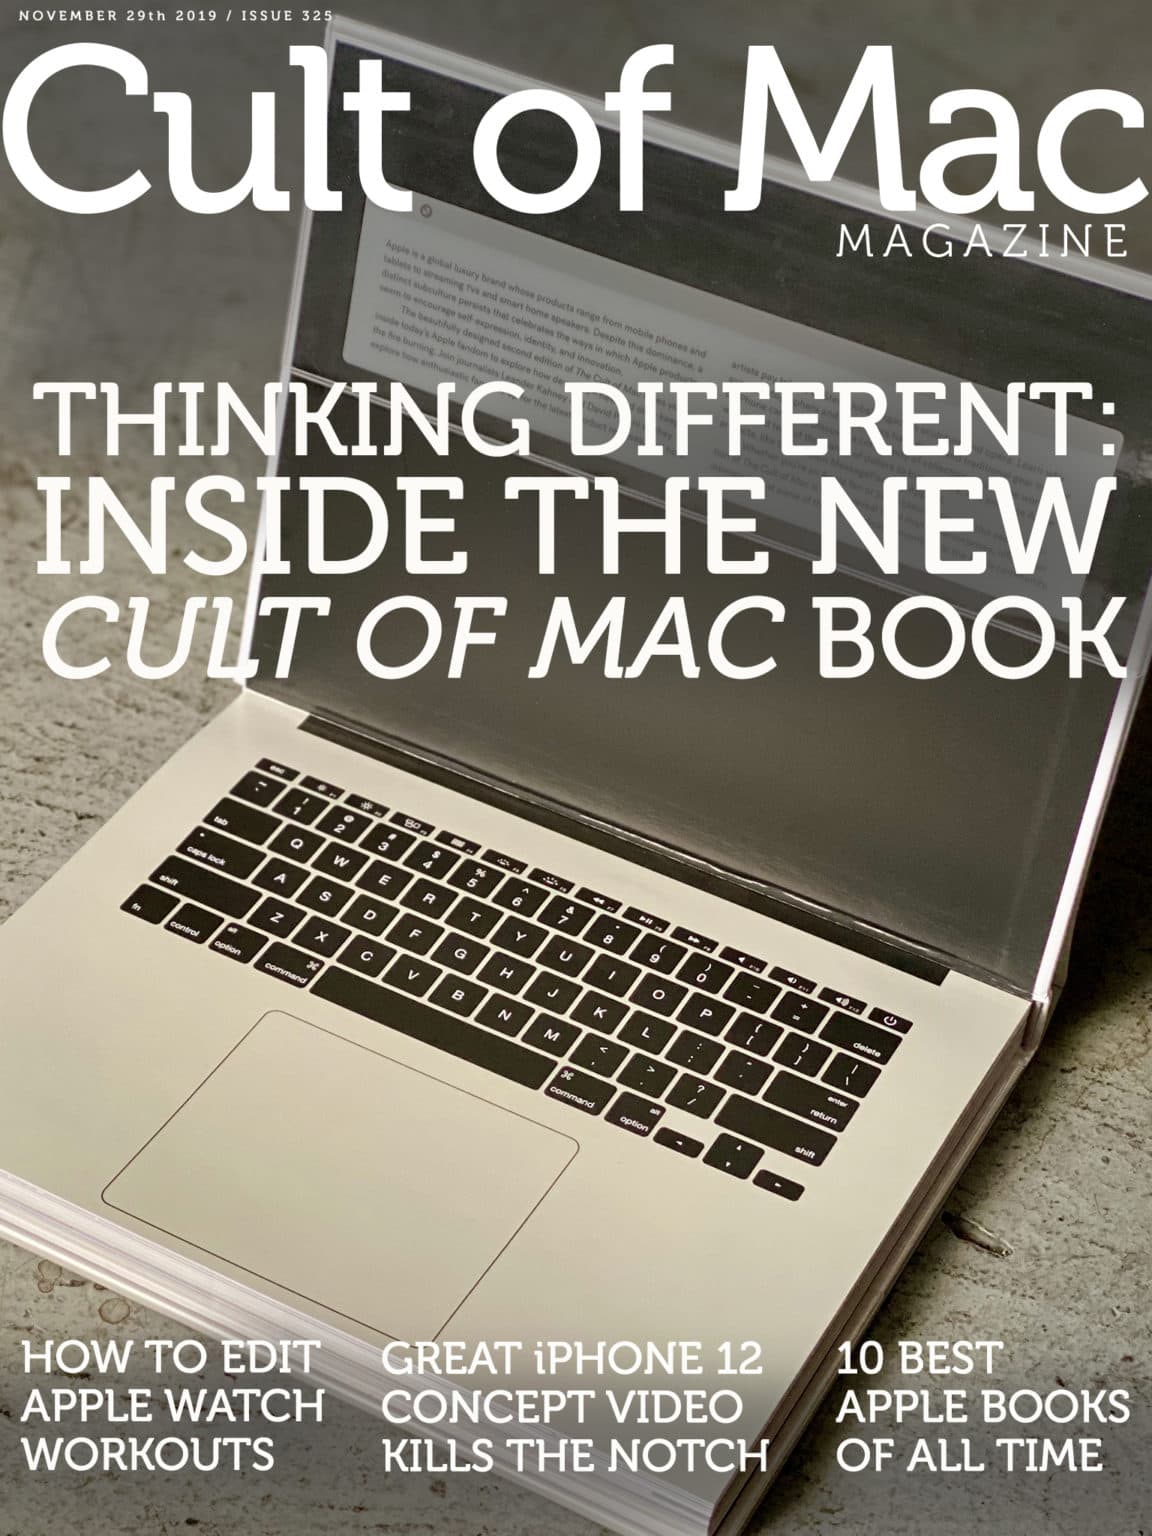 Peek inside the new book Cult of Mac, 2nd Edition.